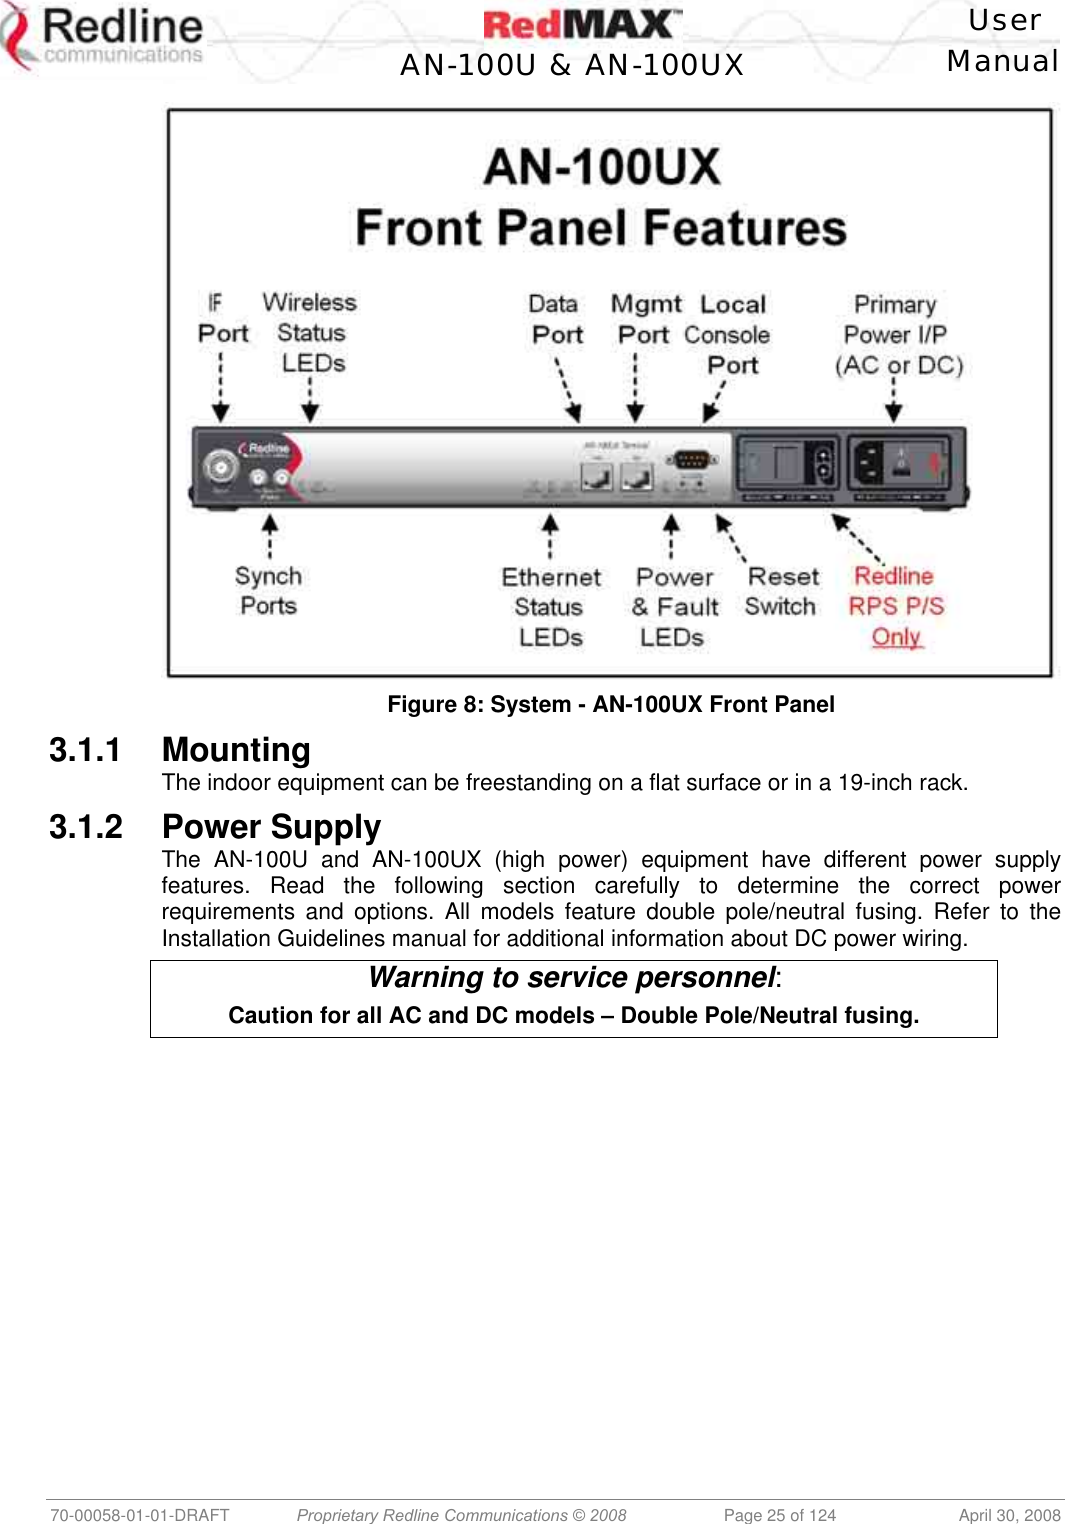    User  AN-100U &amp; AN-100UX Manual   70-00058-01-01-DRAFT  Proprietary Redline Communications © 2008   Page 25 of 124  April 30, 2008  Figure 8: System - AN-100UX Front Panel 3.1.1 Mounting The indoor equipment can be freestanding on a flat surface or in a 19-inch rack. 3.1.2 Power Supply The AN-100U and AN-100UX (high power) equipment have different power supply features. Read the following section carefully to determine the correct power requirements and options. All models feature double pole/neutral fusing. Refer to the Installation Guidelines manual for additional information about DC power wiring. Warning to service personnel: Caution for all AC and DC models – Double Pole/Neutral fusing.  